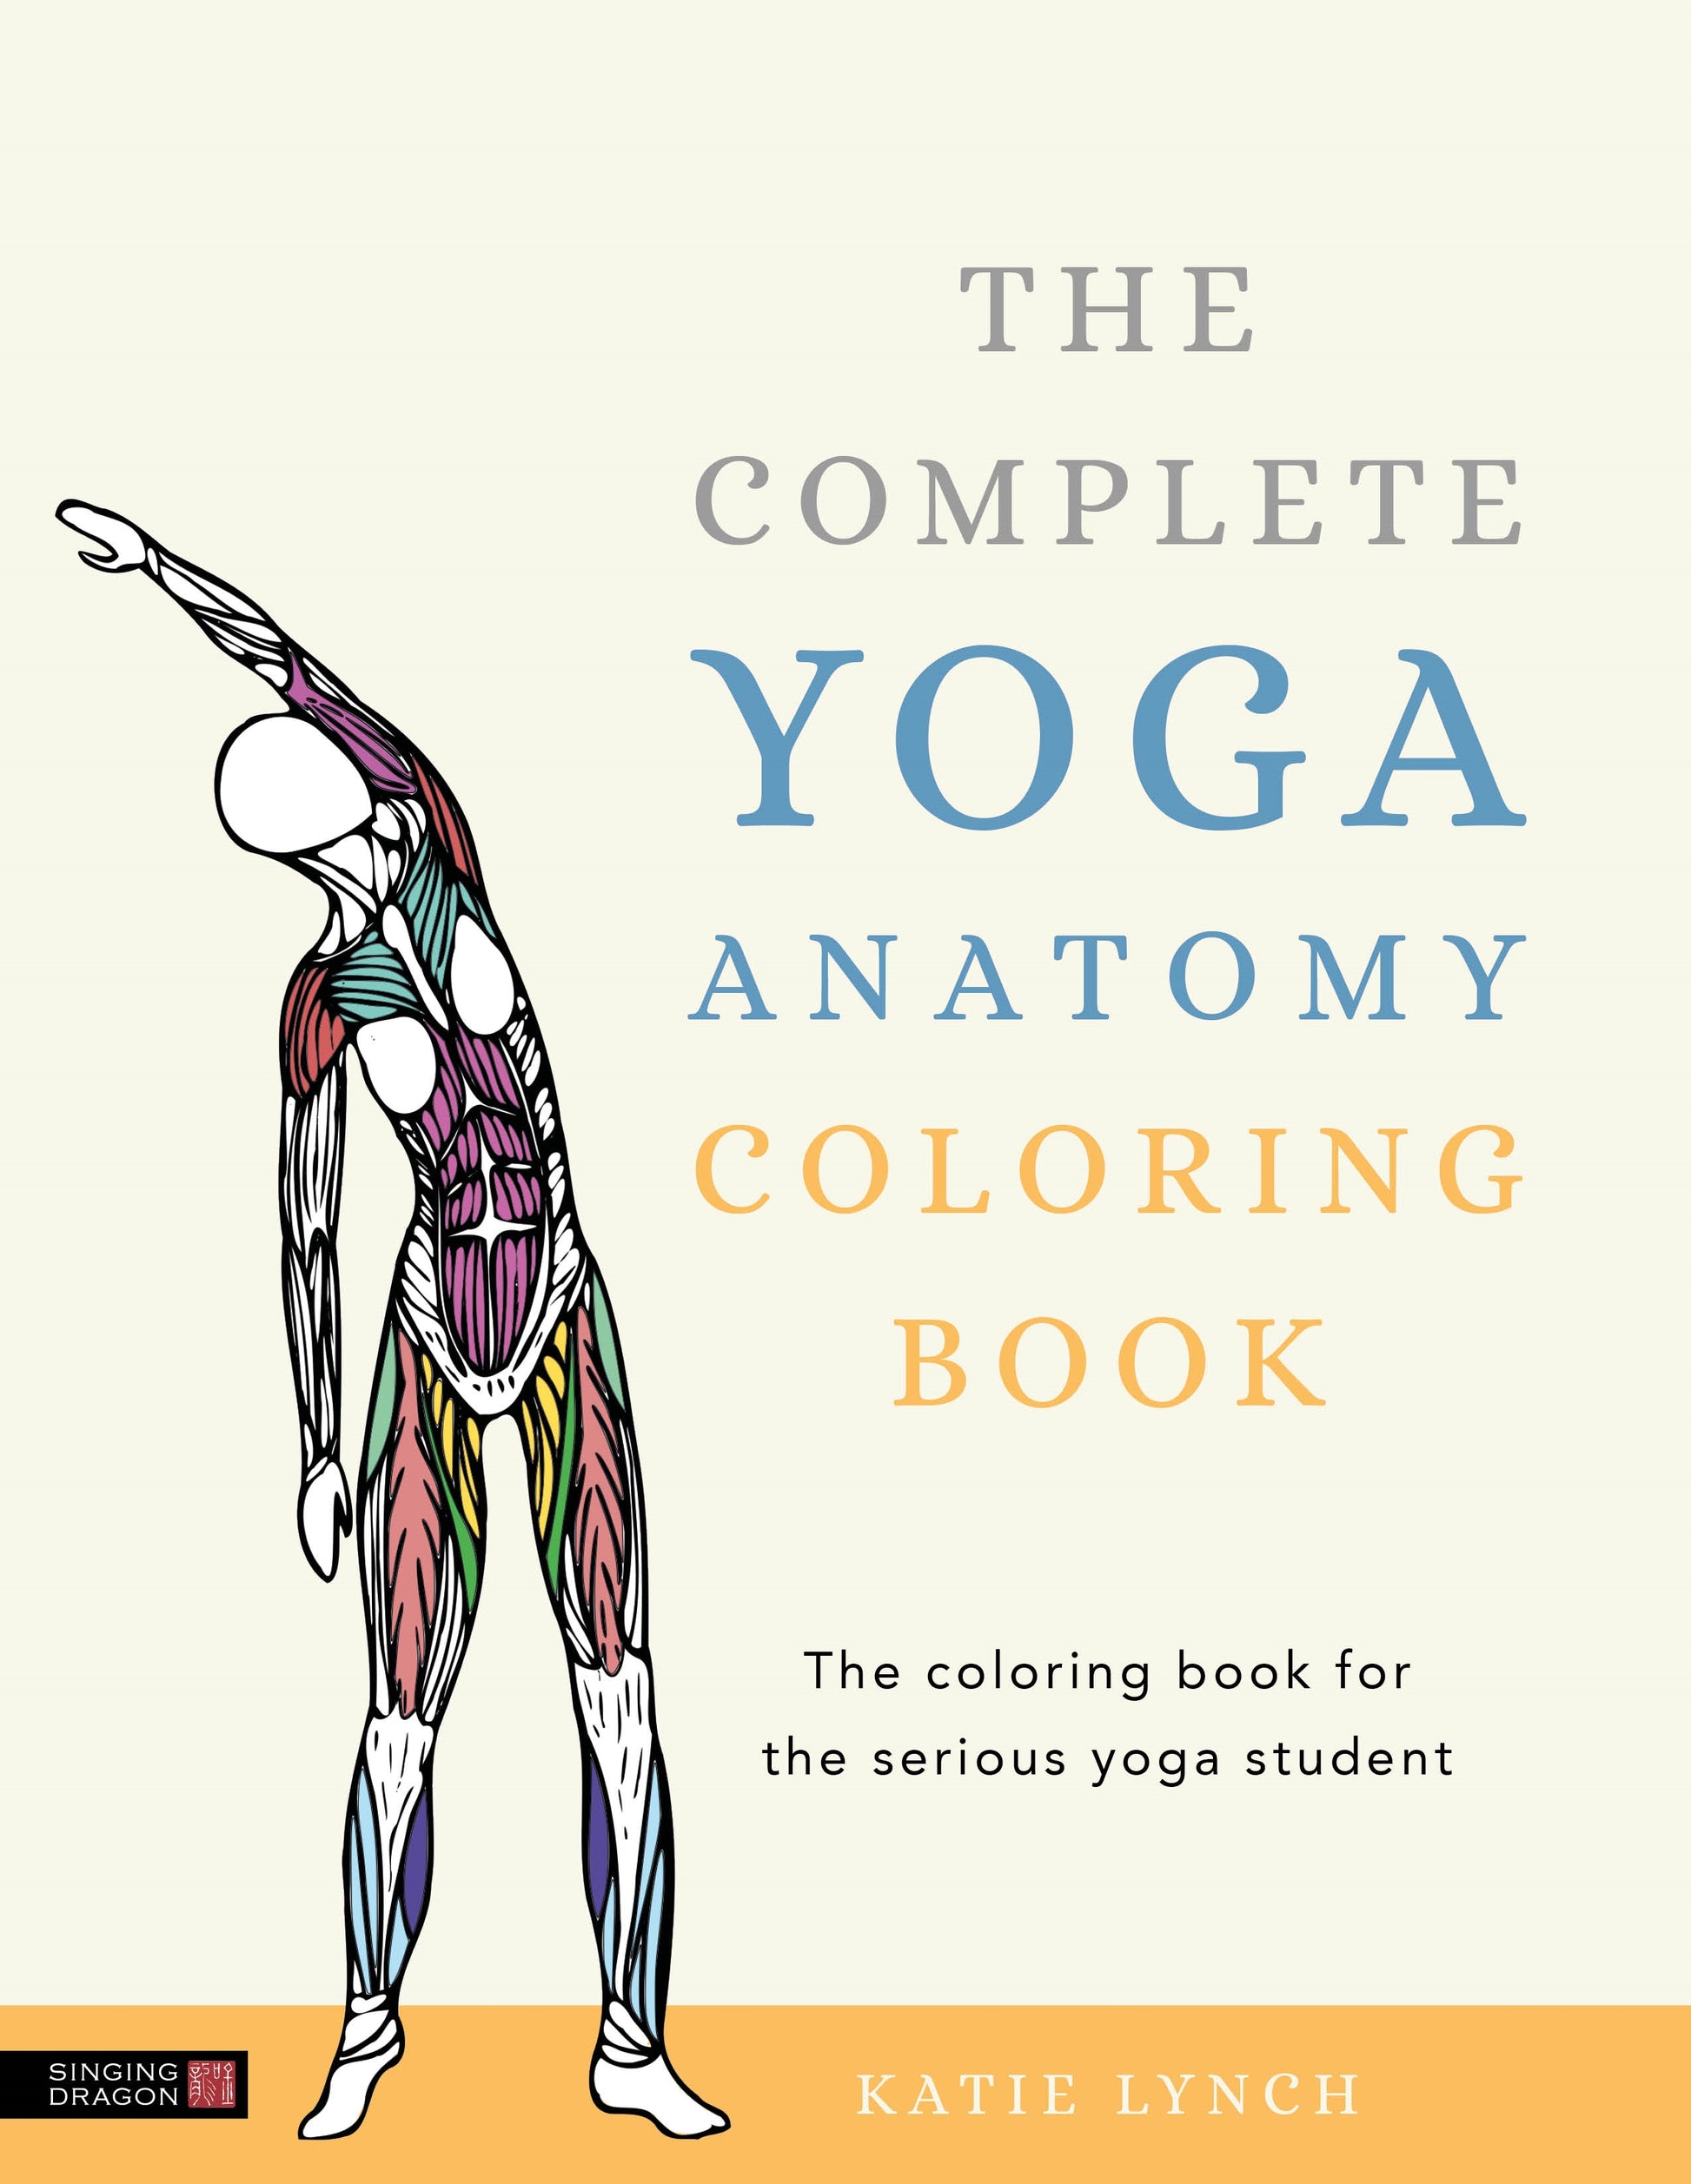 The Complete Yoga Anatomy Coloring Book by Katie Lynch